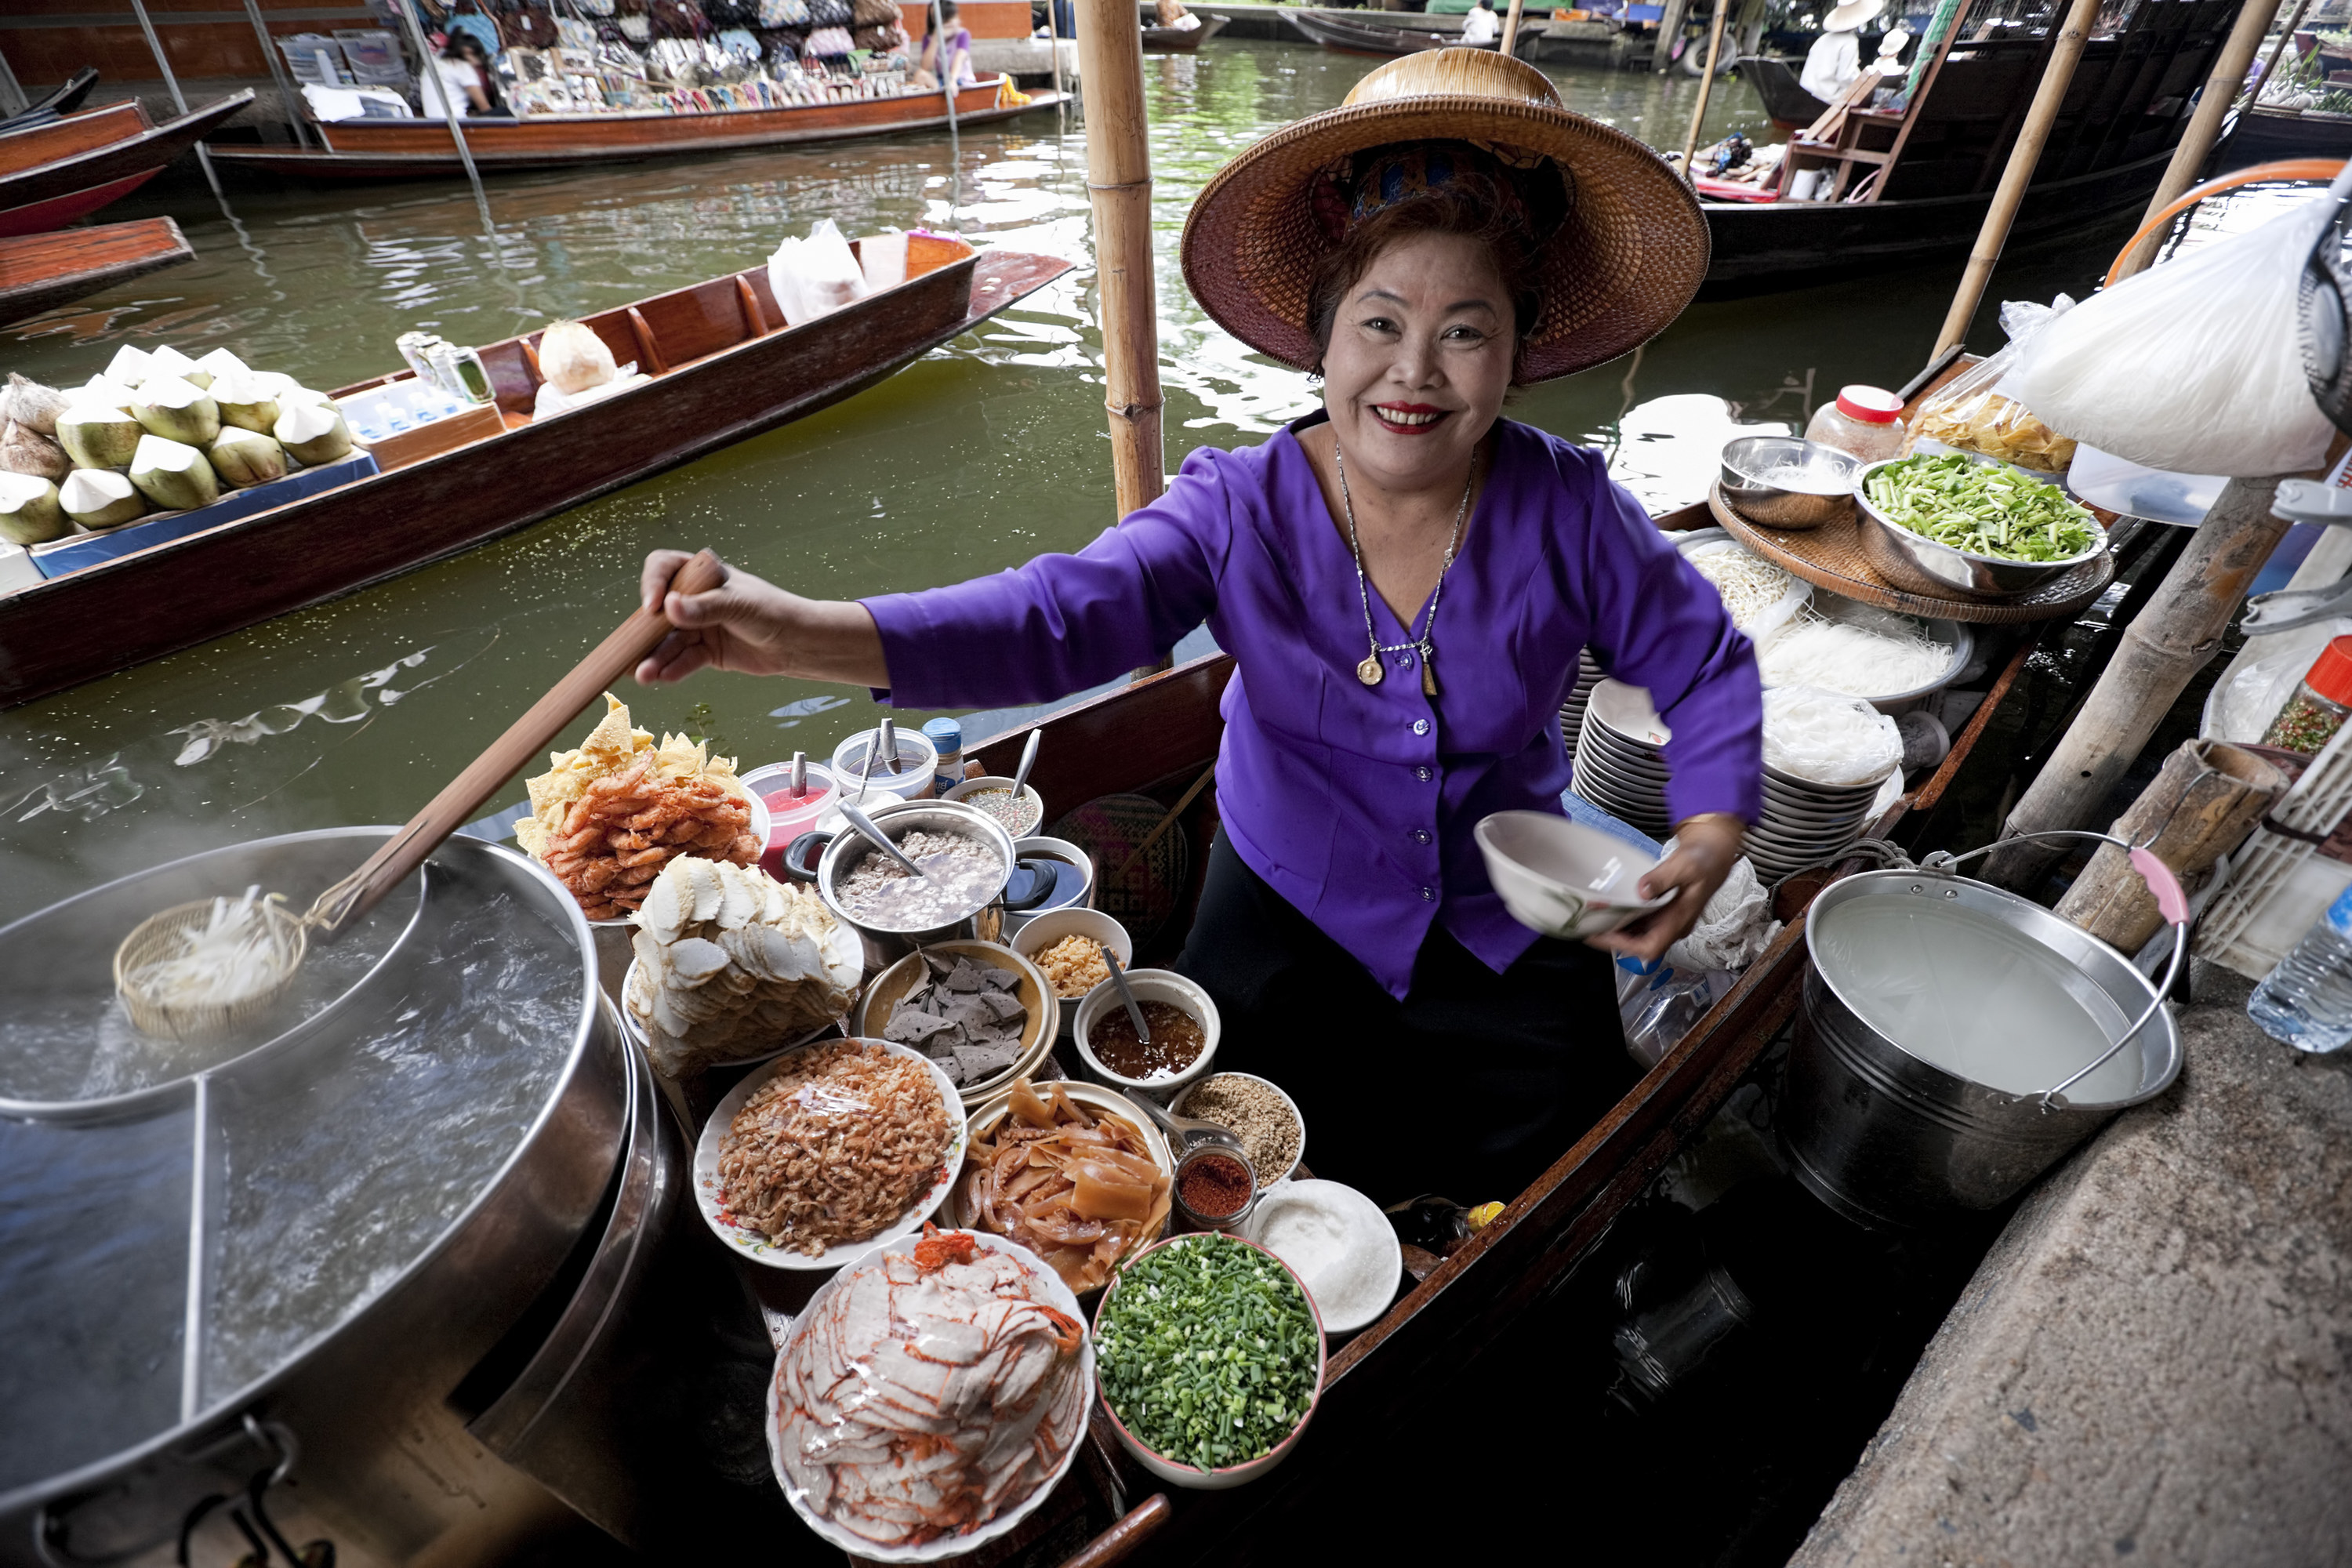 A street foot-vending woman smiles broadly at the camera. She is surrounded by various ingredients and holds a serving of noodles.